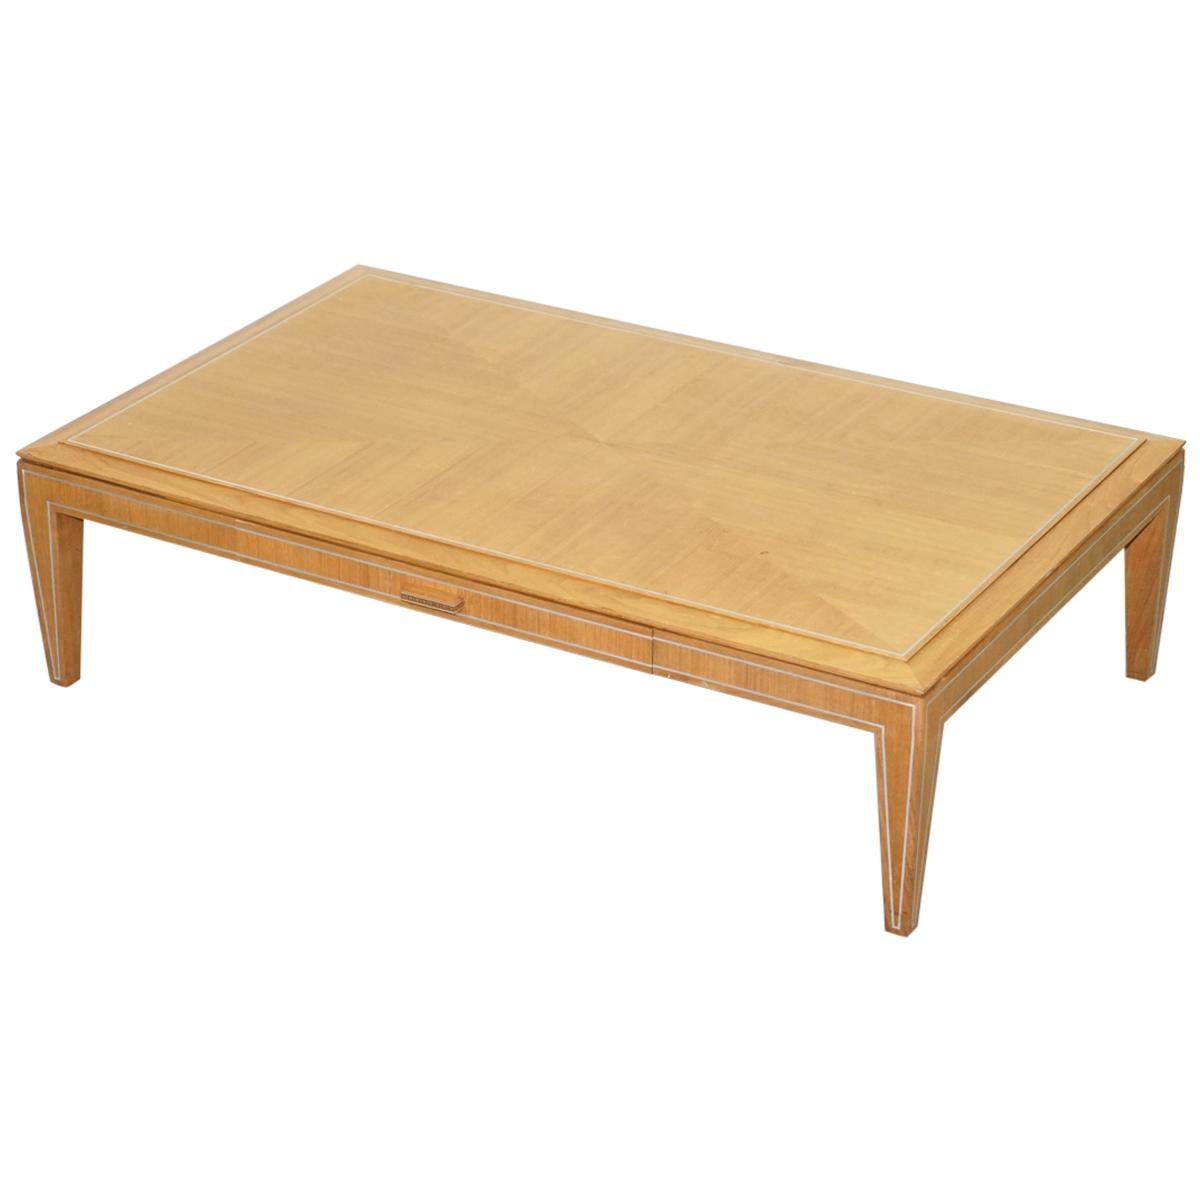 Viscount David Linley Sycamore Walnut with Chrome Inlay Coffee Table